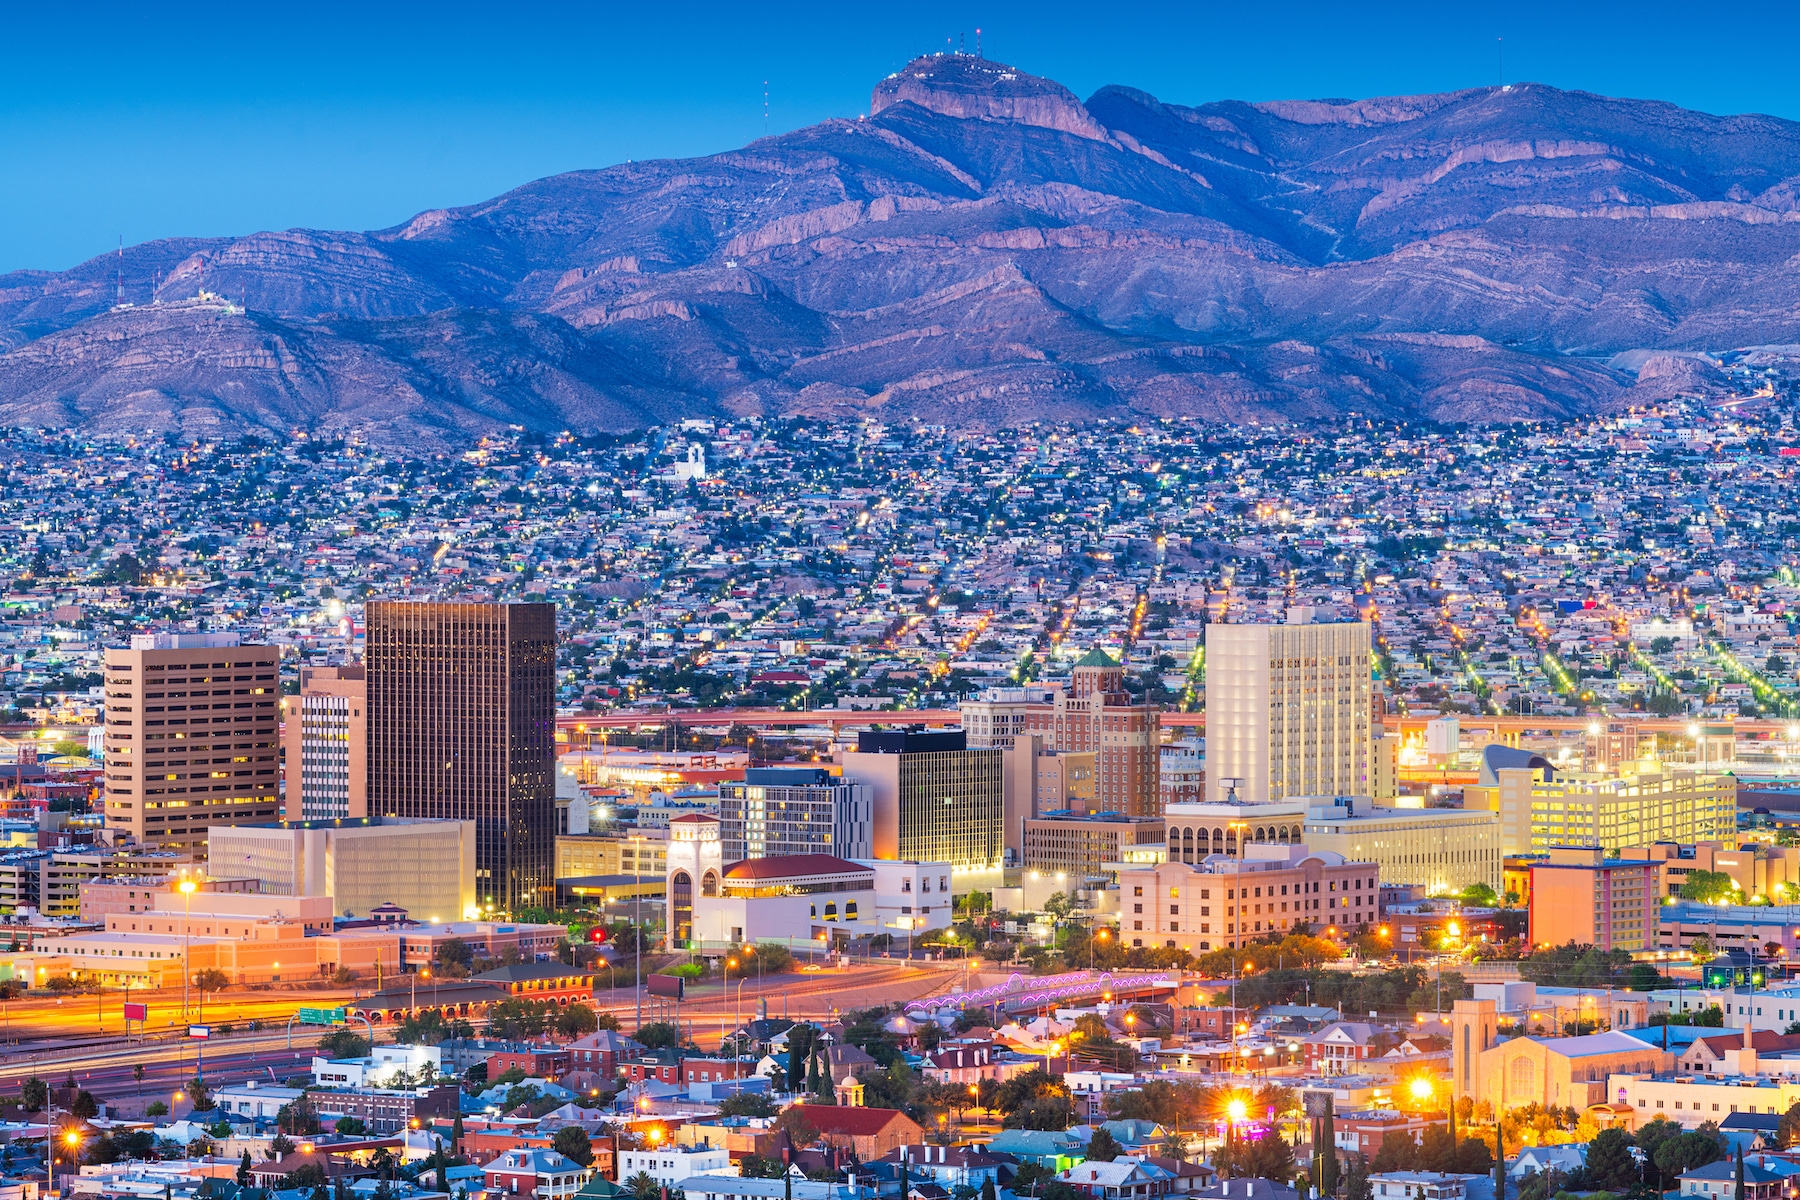 El Paso selected for US$8.8 million grant